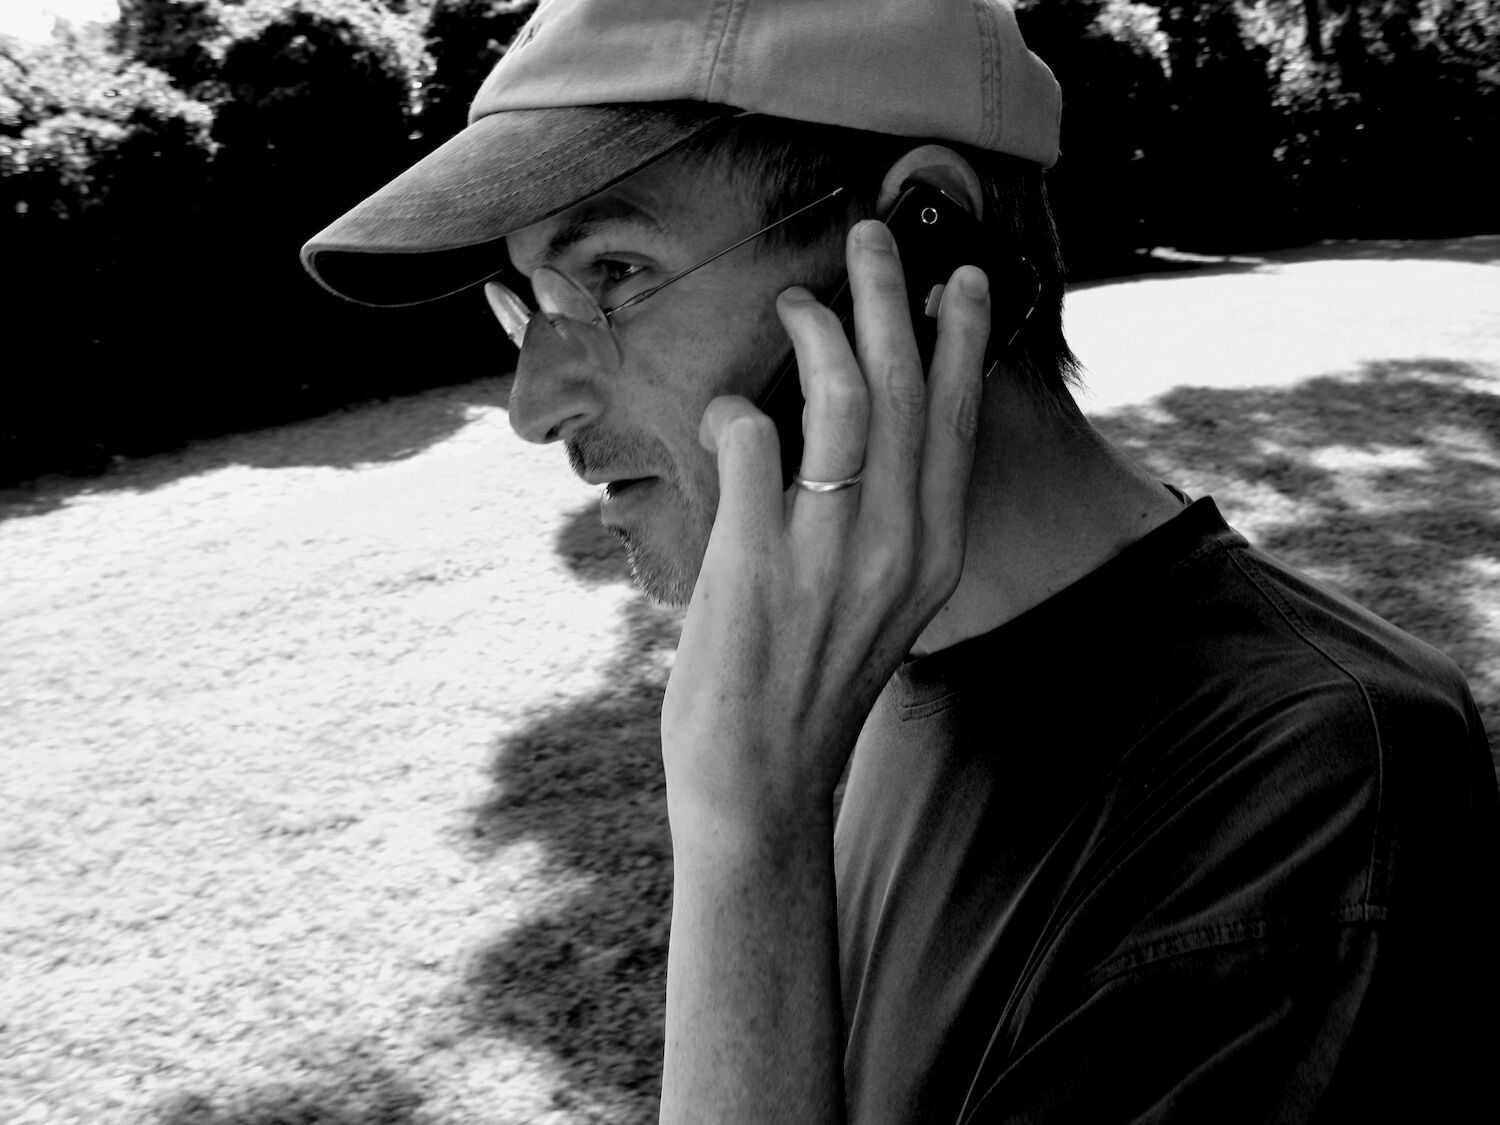 A candid photograph of Steve, wearing a baseball cap and black T-shirt, as he talks on his iPhone outdoors.